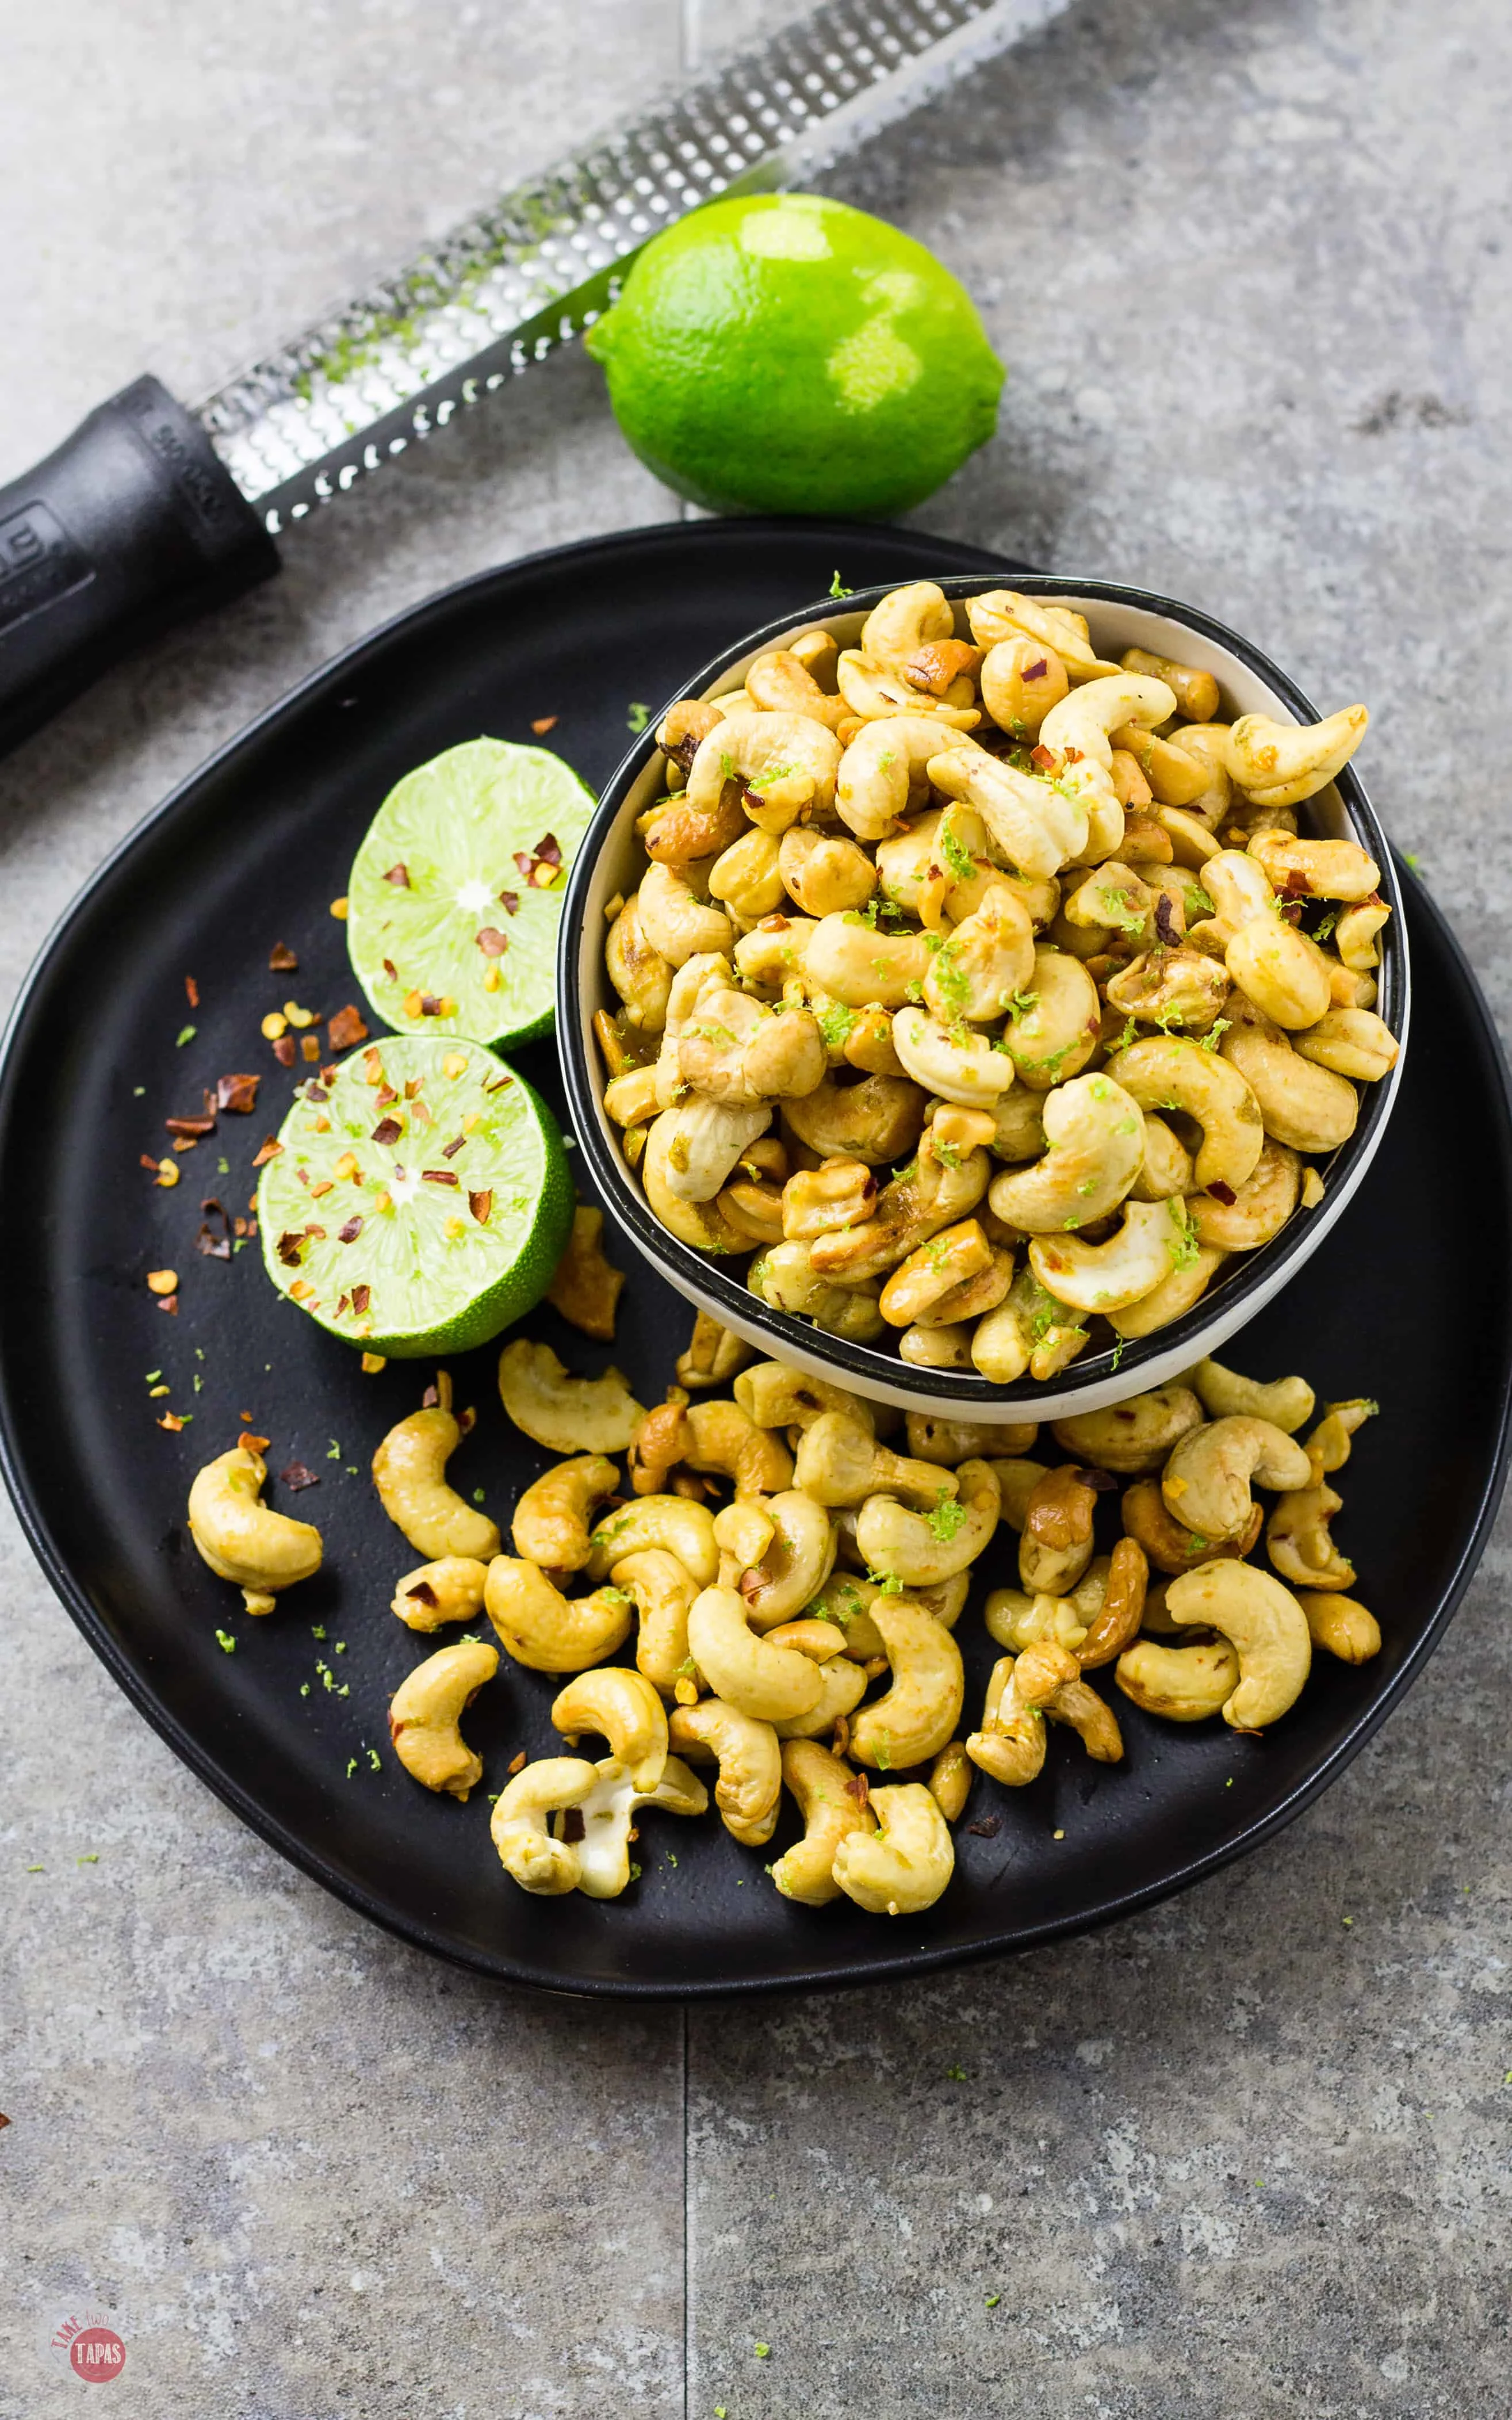 Spice up your snack nuts with my Chili Lime Cashews | Take Two Tapas | #Cashews #MixedNuts #SpicedNuts #SnackMix #Lime #Cashews #Nuts